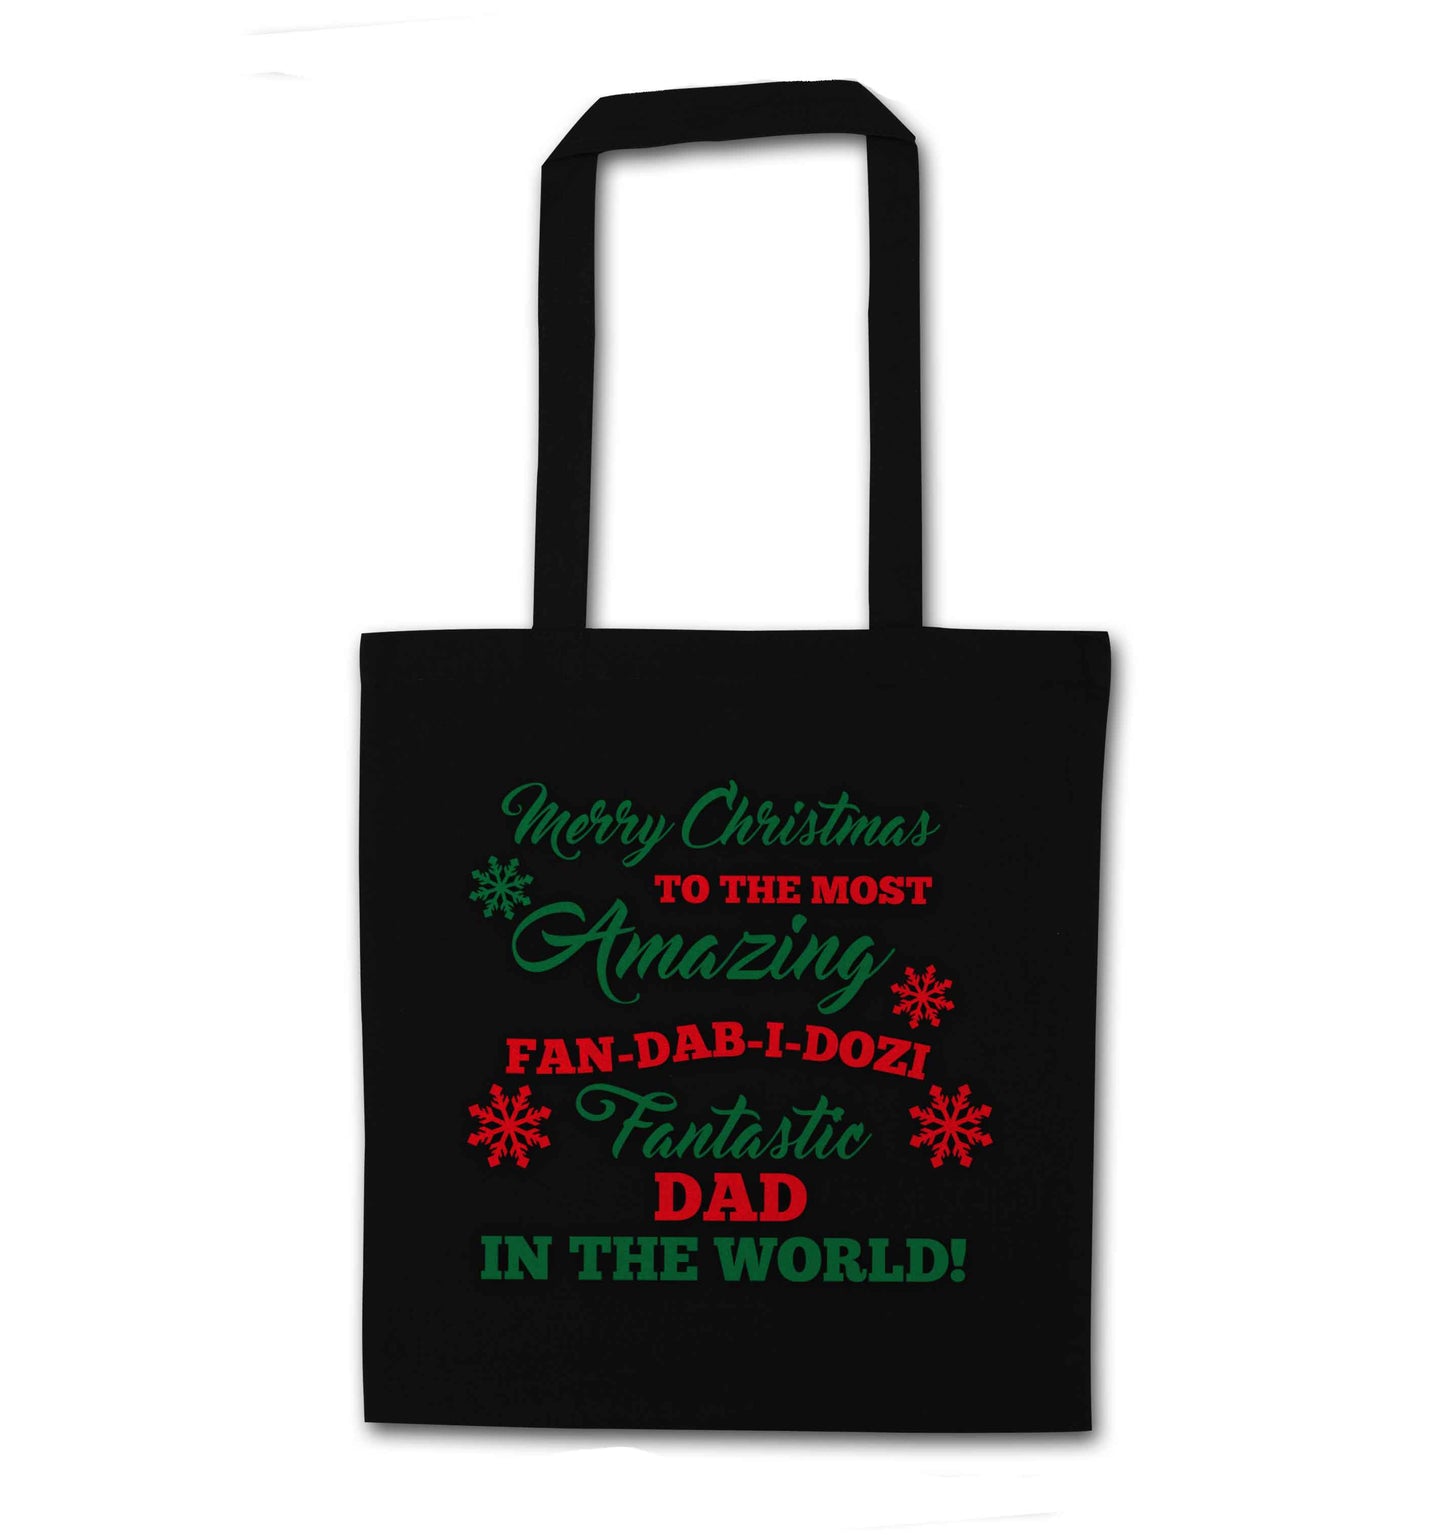 Merry Christmas to the most amazing fan-dab-i-dozi fantasic Dad in the world black tote bag